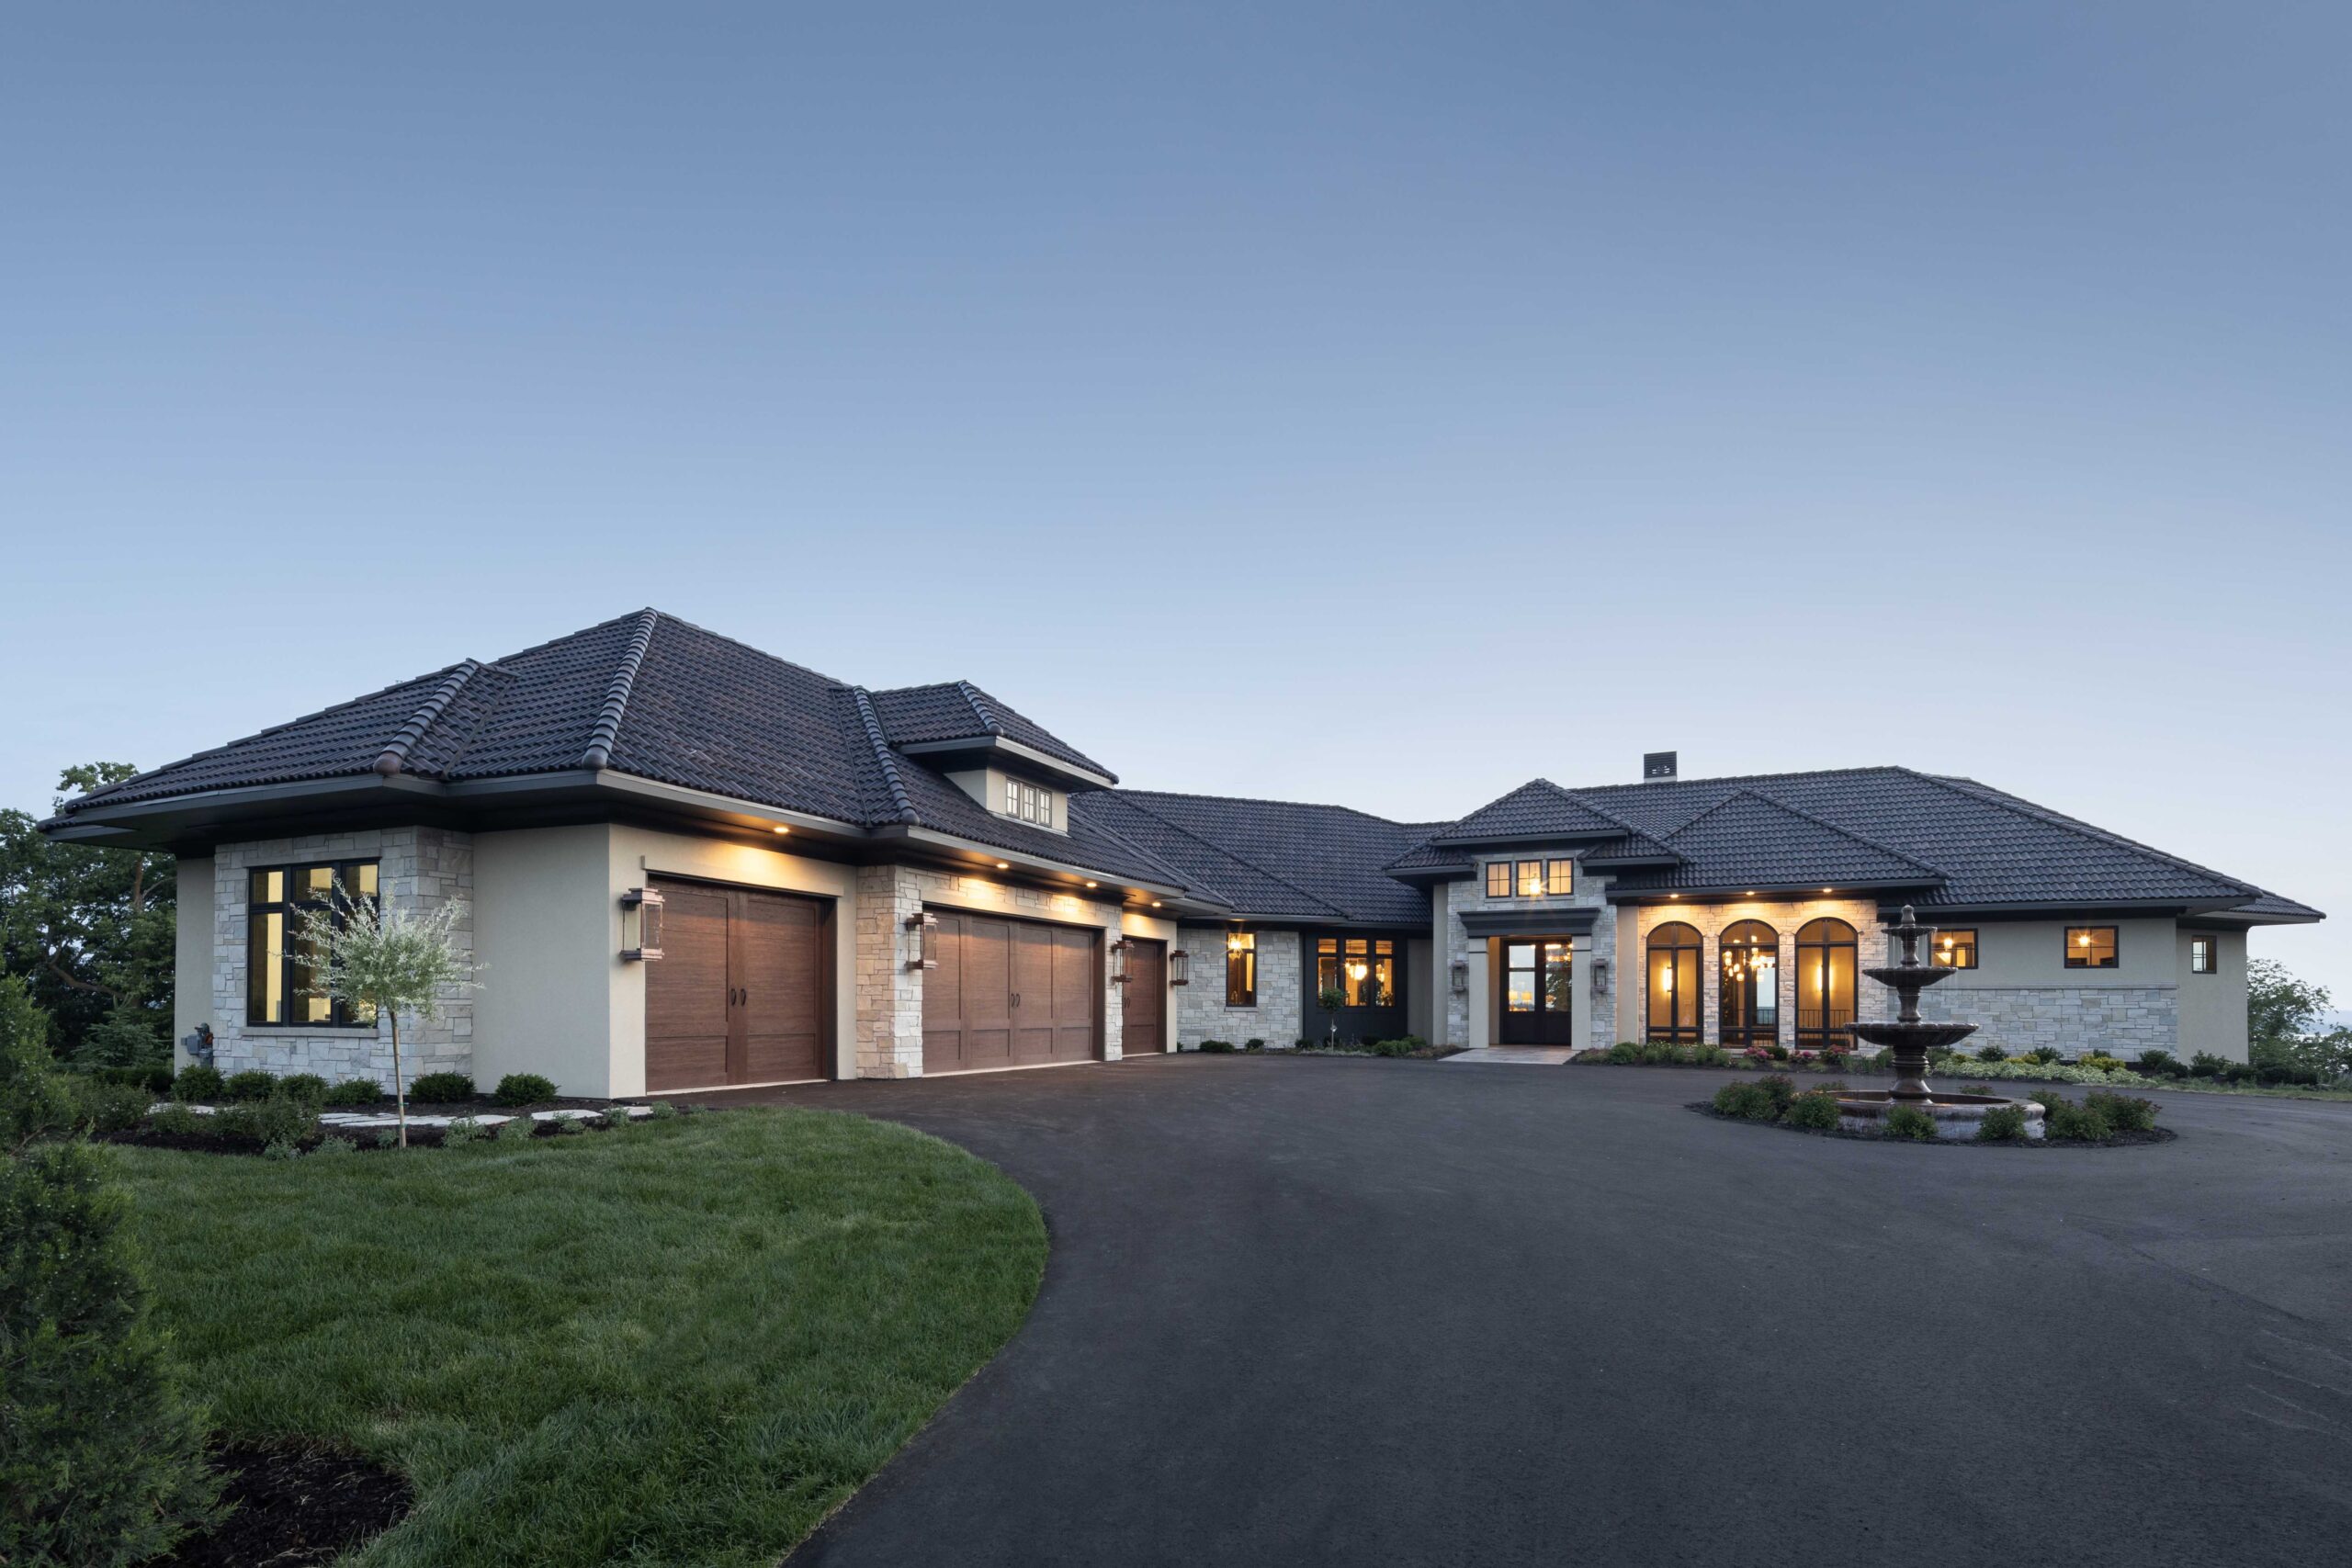 A stunning Modern Tuscan Mediterranean home featuring a spacious driveway and attached garage.